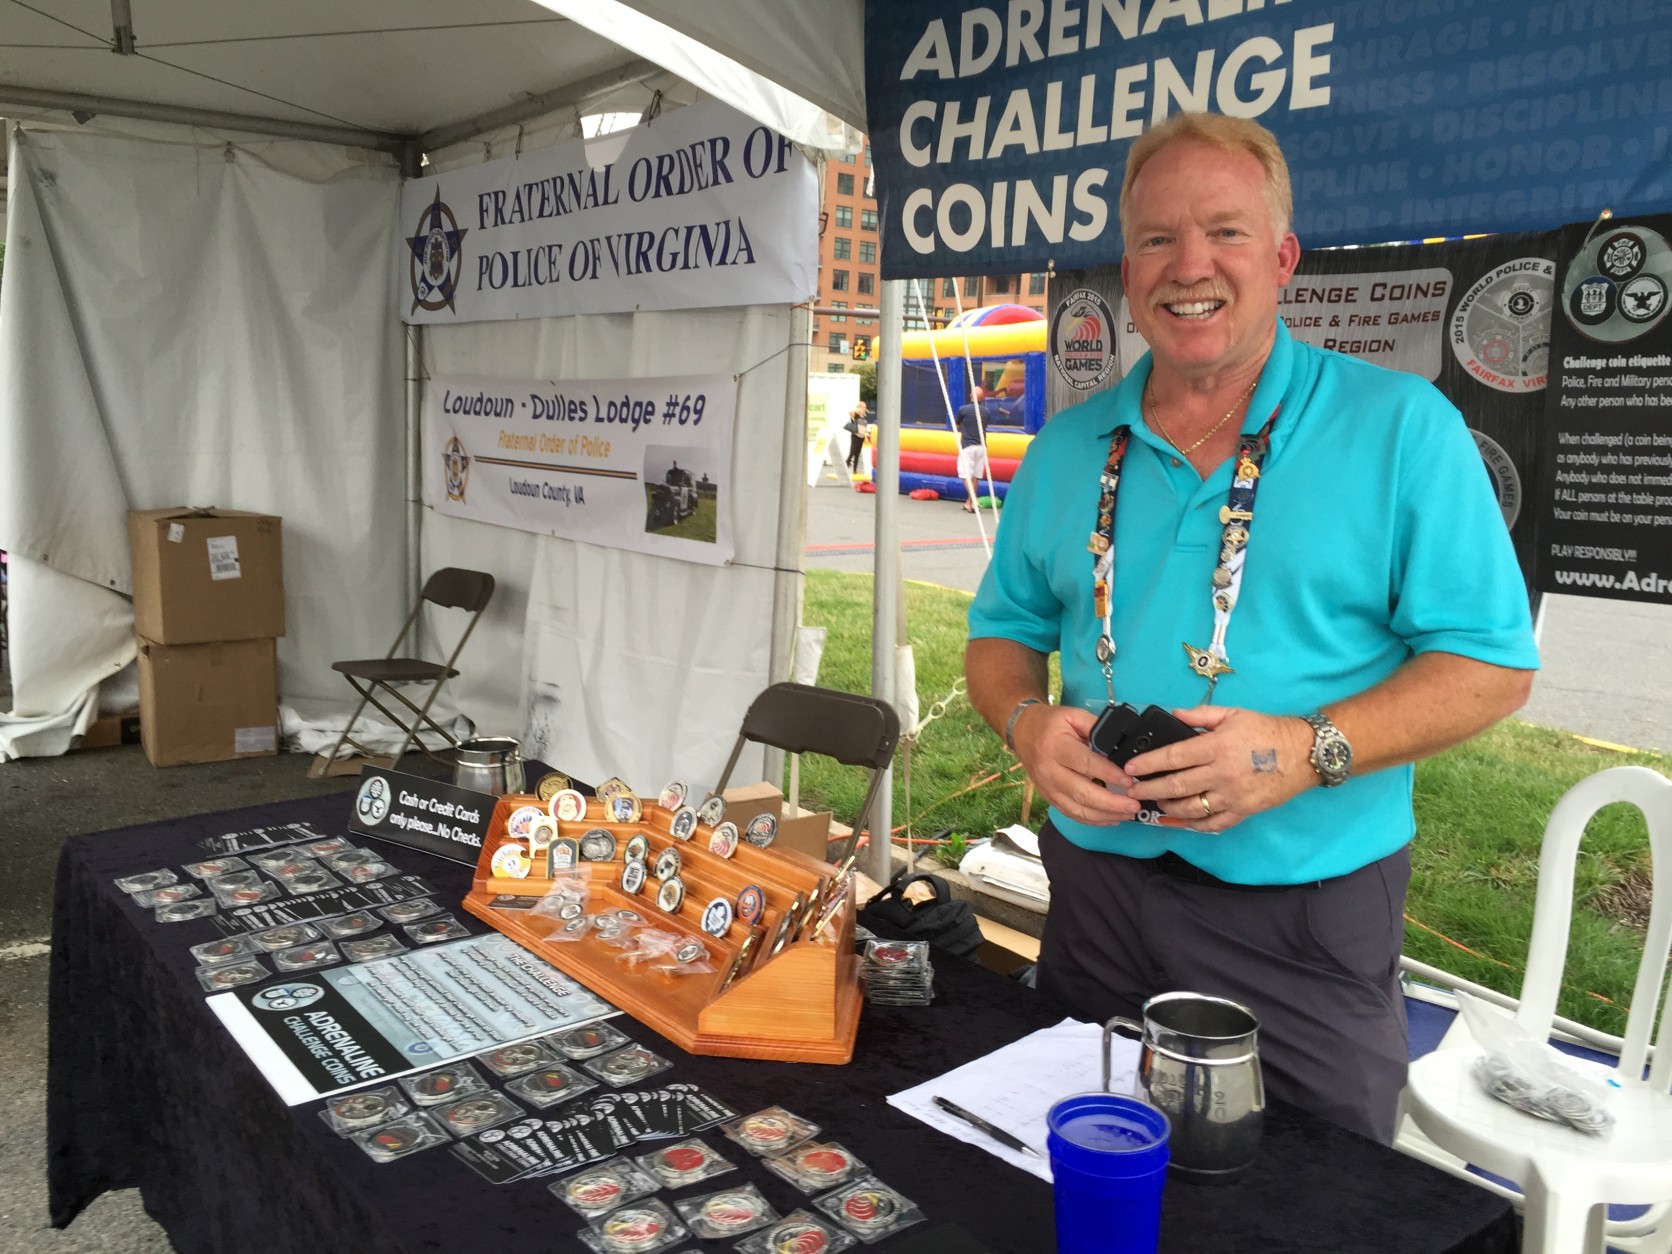 Selling his wares at the World Police and Fire Games through Sunday. (WTOP/Kristi King)